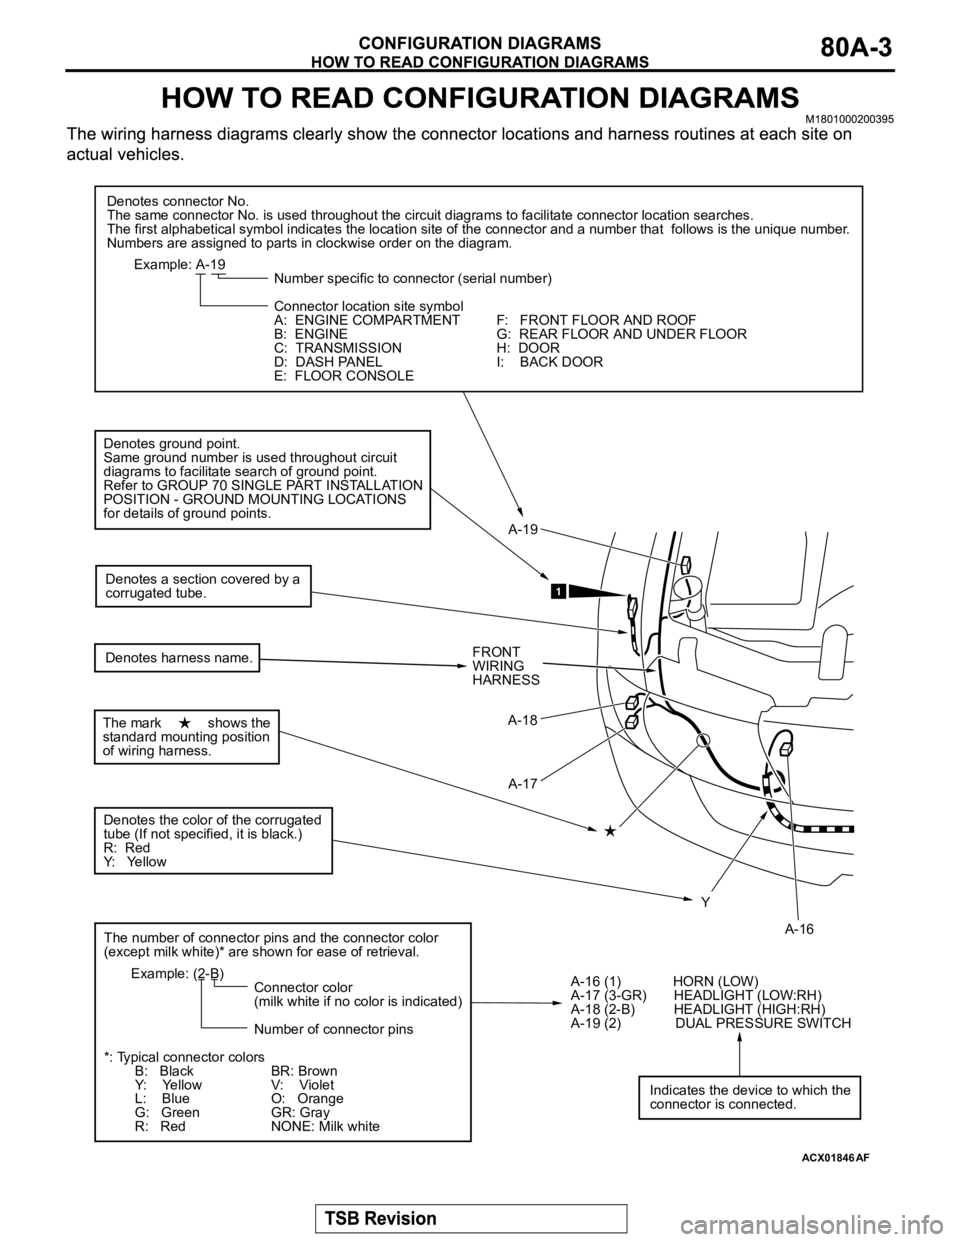 MITSUBISHI MONTERO 2003  Service Repair Manual ACX01846
A-16 Y A-17 A-18A-19
Denotes connector No.
The same connector No. is used throughout the circuit diagrams to facilitate connector location searches.
The first alphabetical symbol indicates th